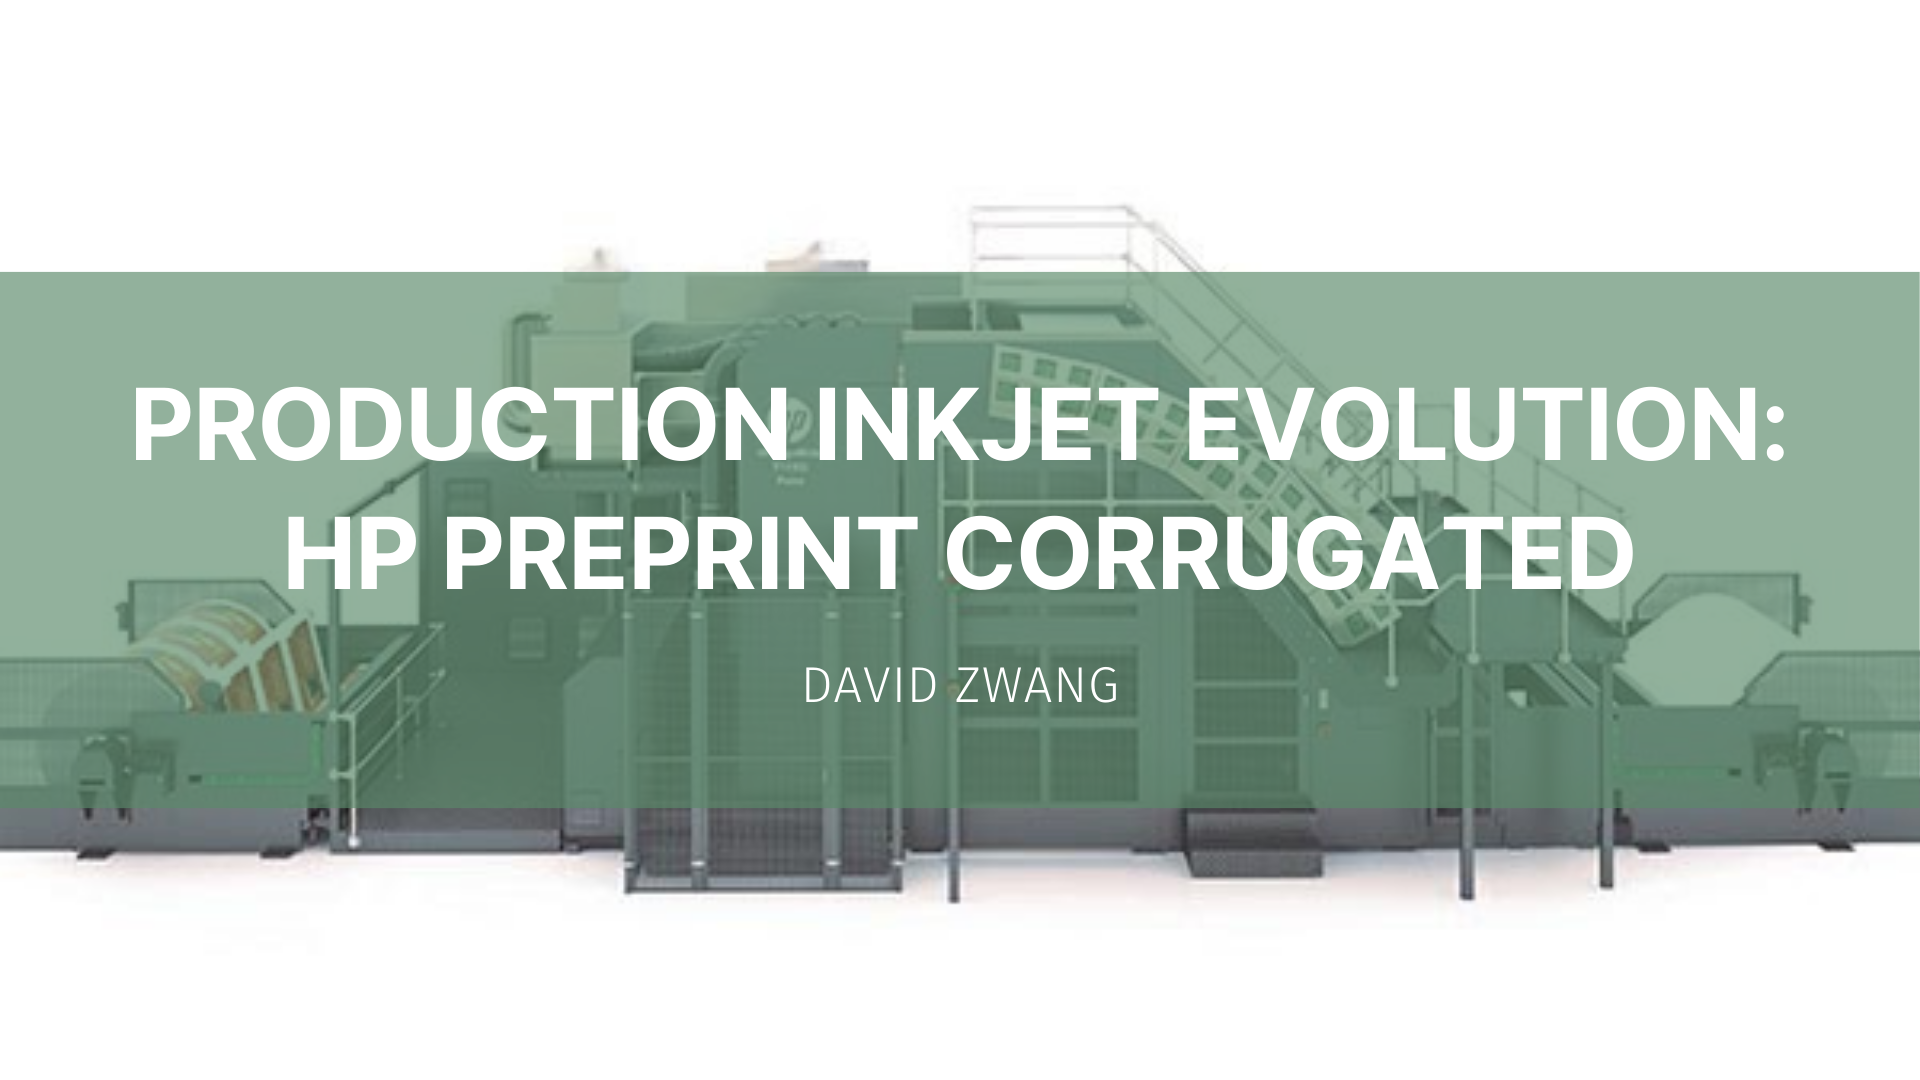 Featured image for “Production Inkjet Evolution: HP Preprint Corrugated”